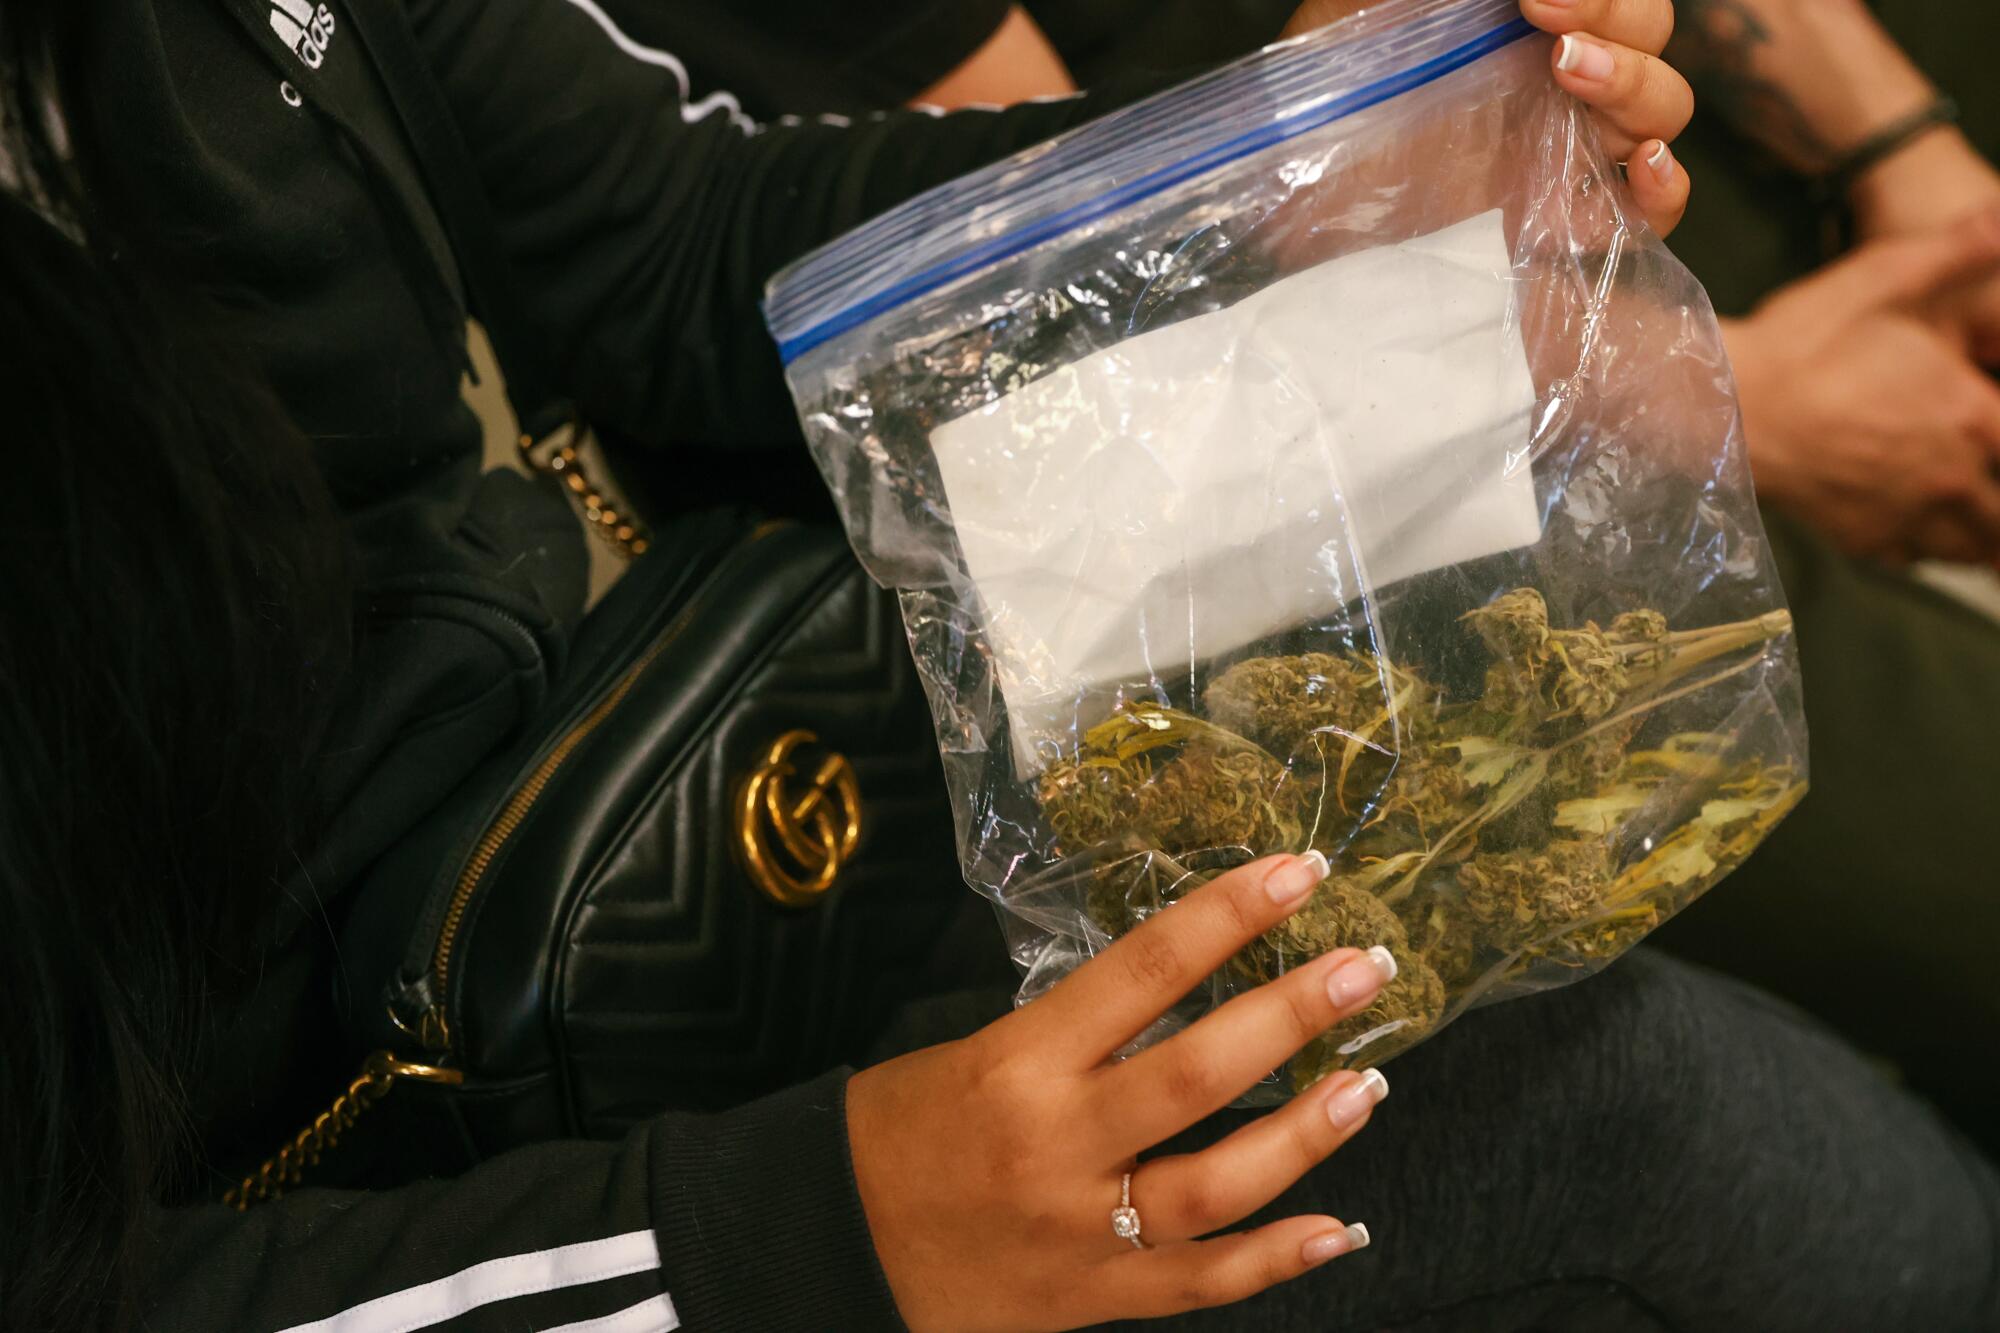 A well-manicured hand holds a plastic bag full of cannabis buds.